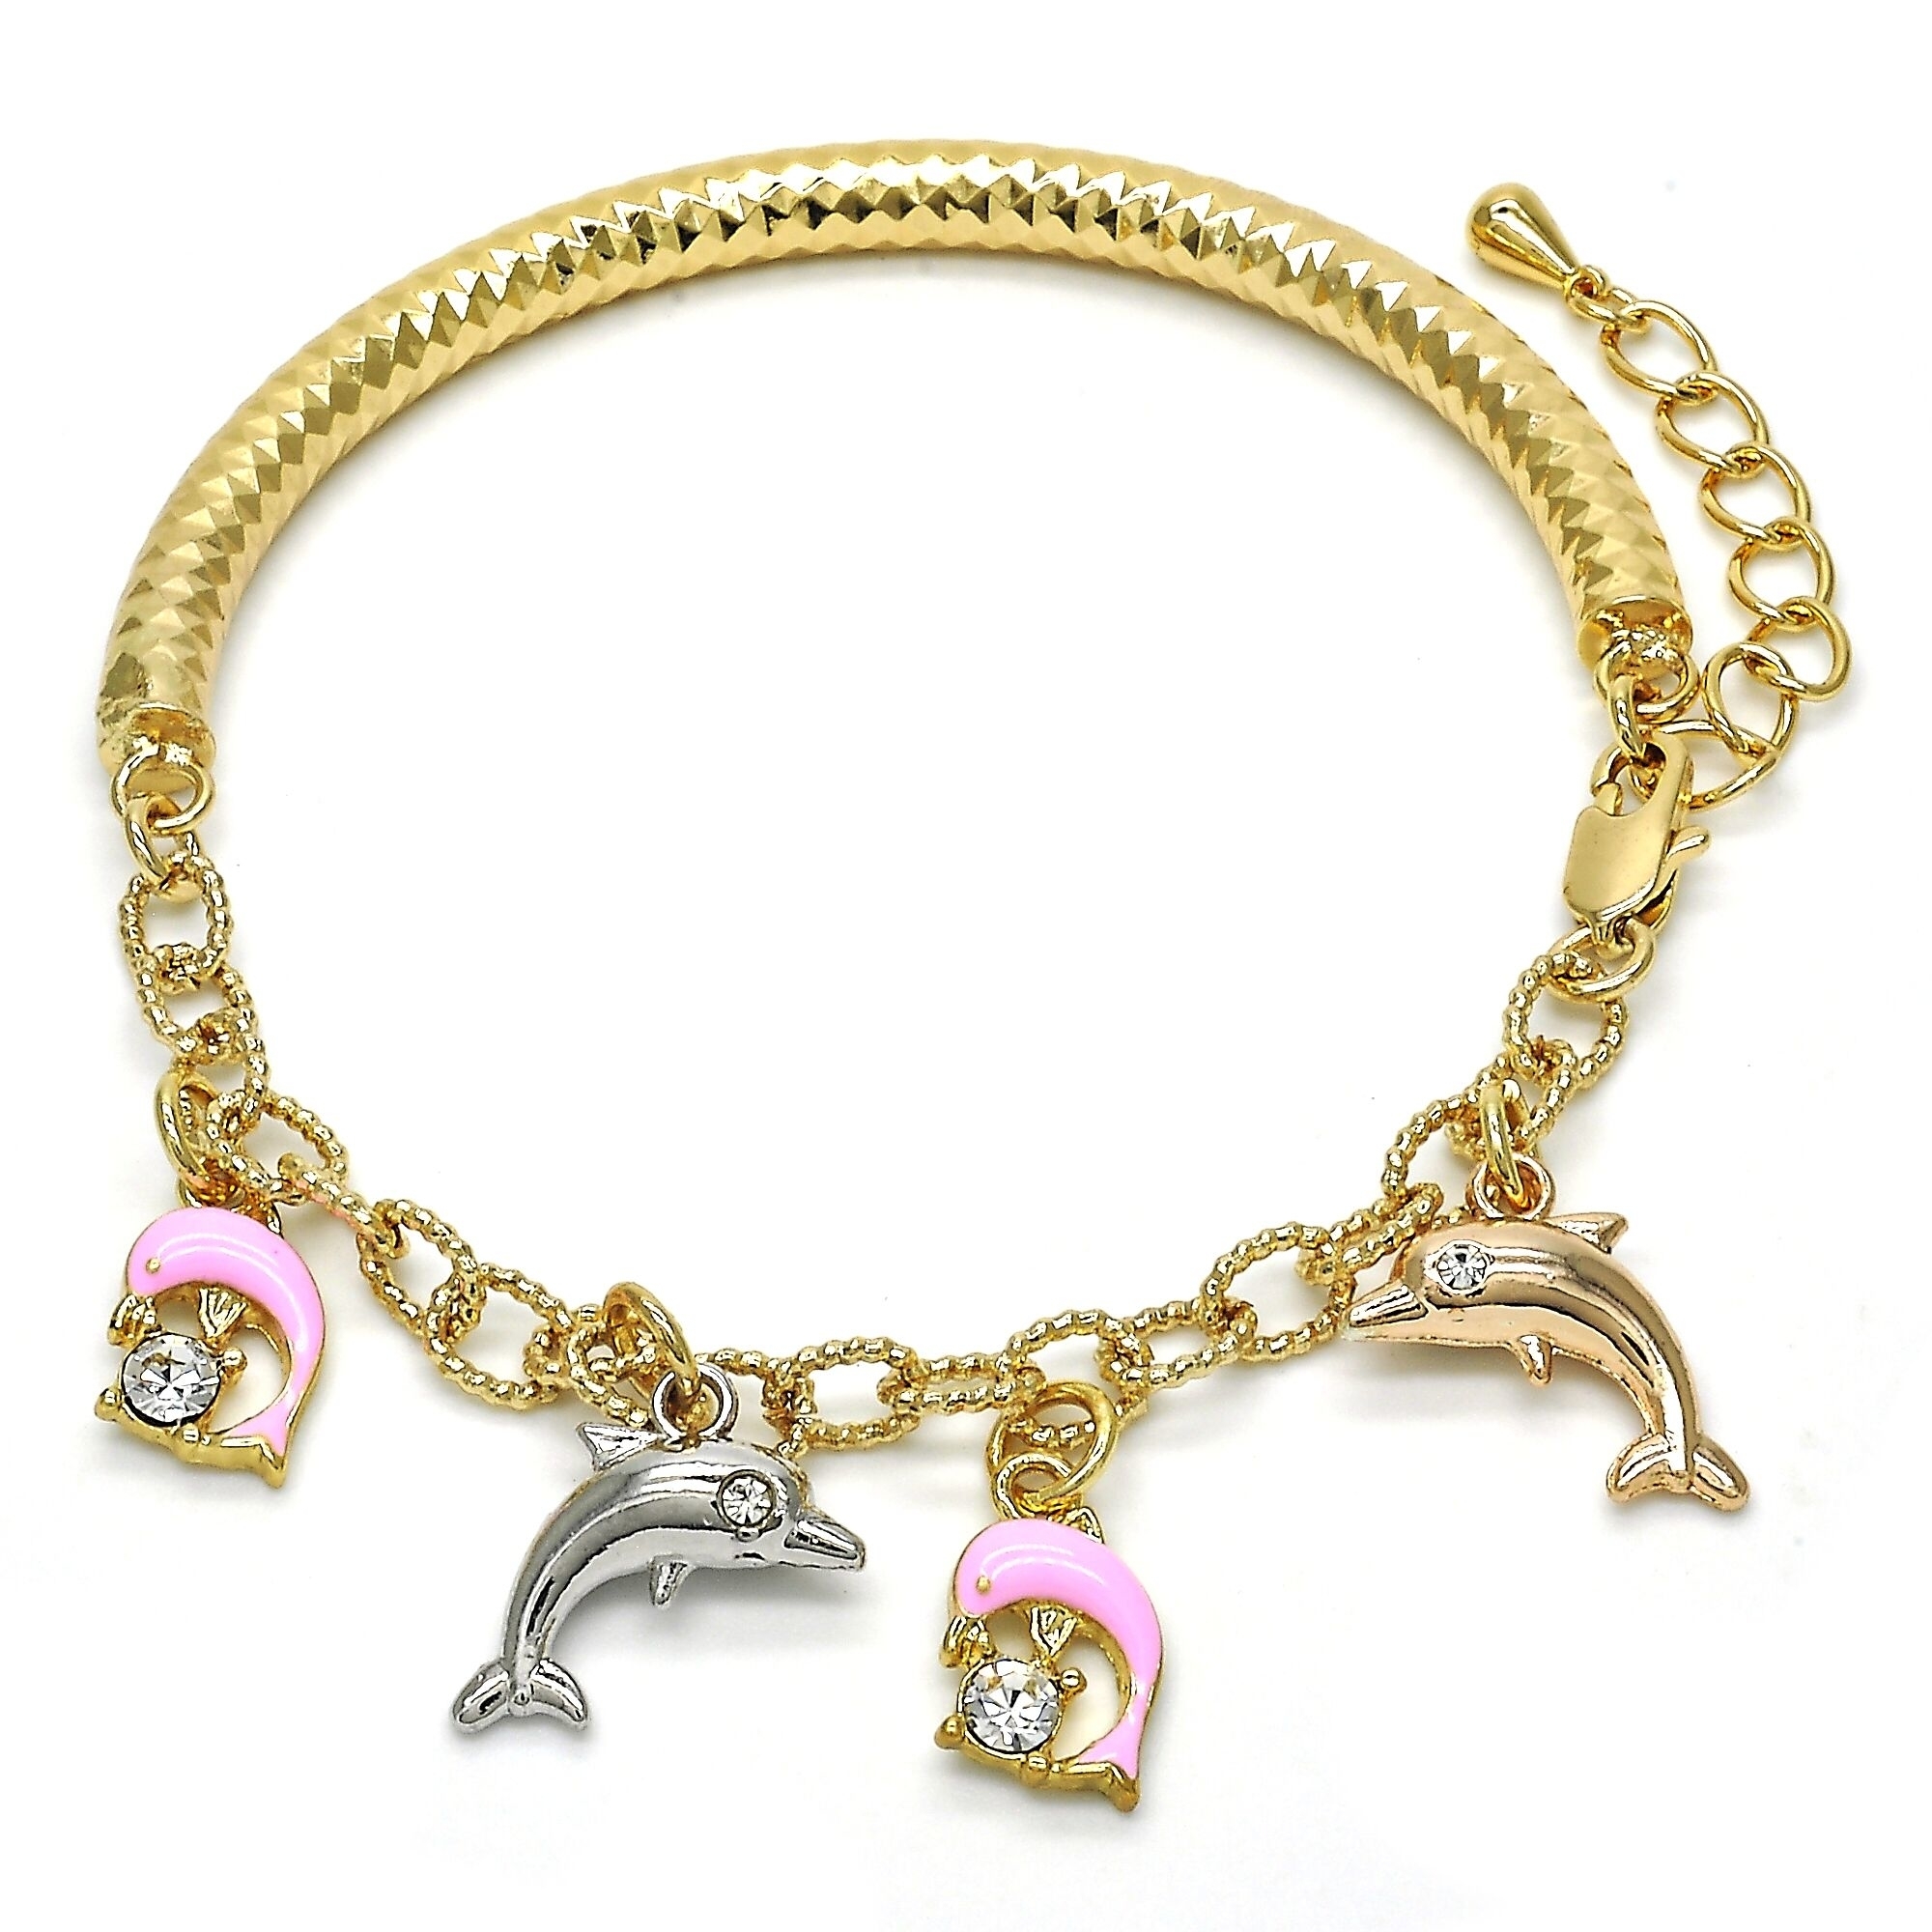 Gold Filled Charm Bracelet, Dolphin And Hollow Design, With Crystal, Tri Tone